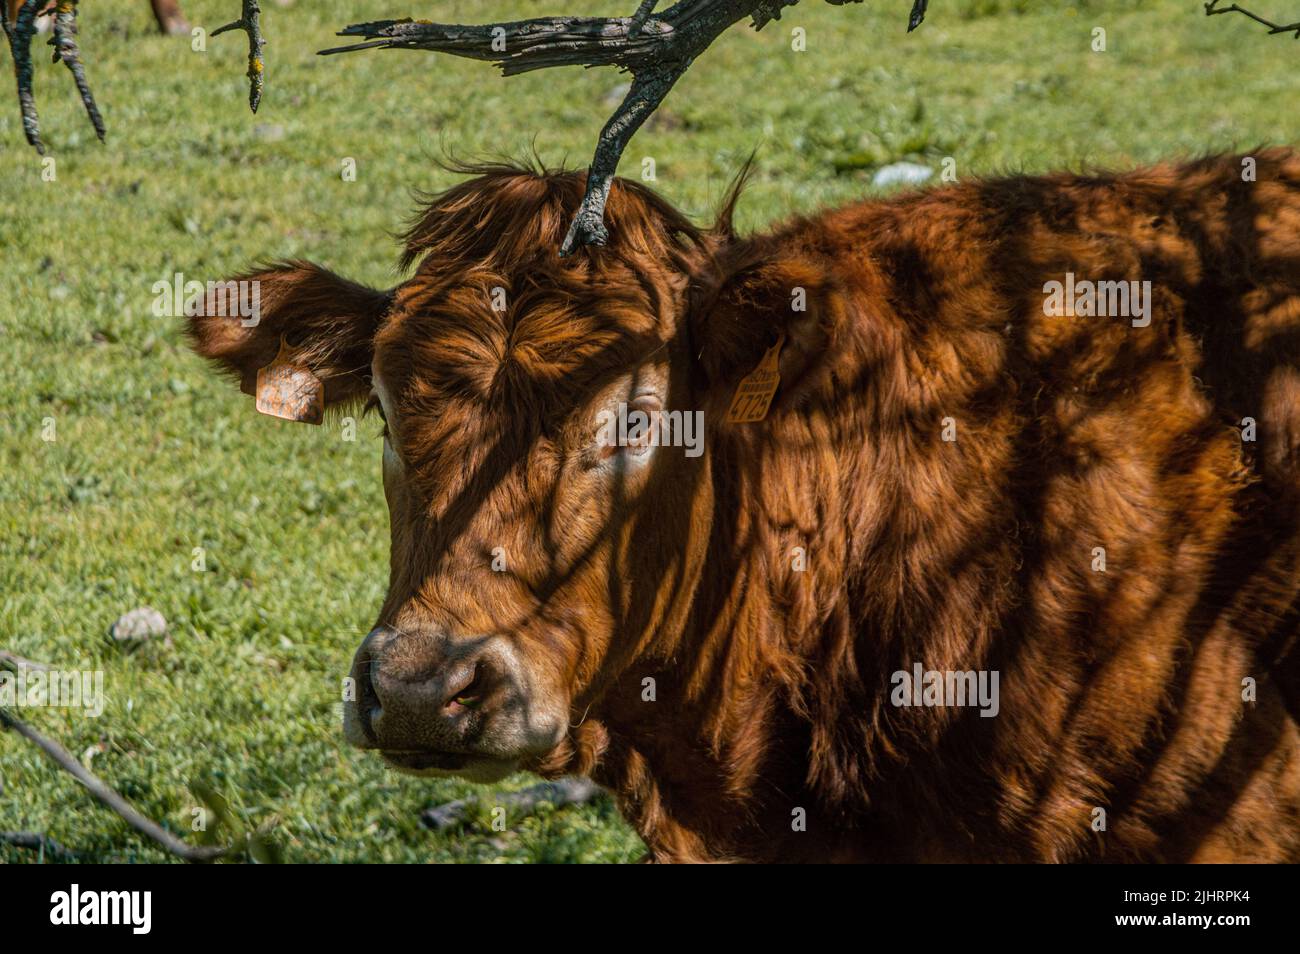 A Tarentaise cattle looking at the camera with the branch shadows on brown fur Stock Photo